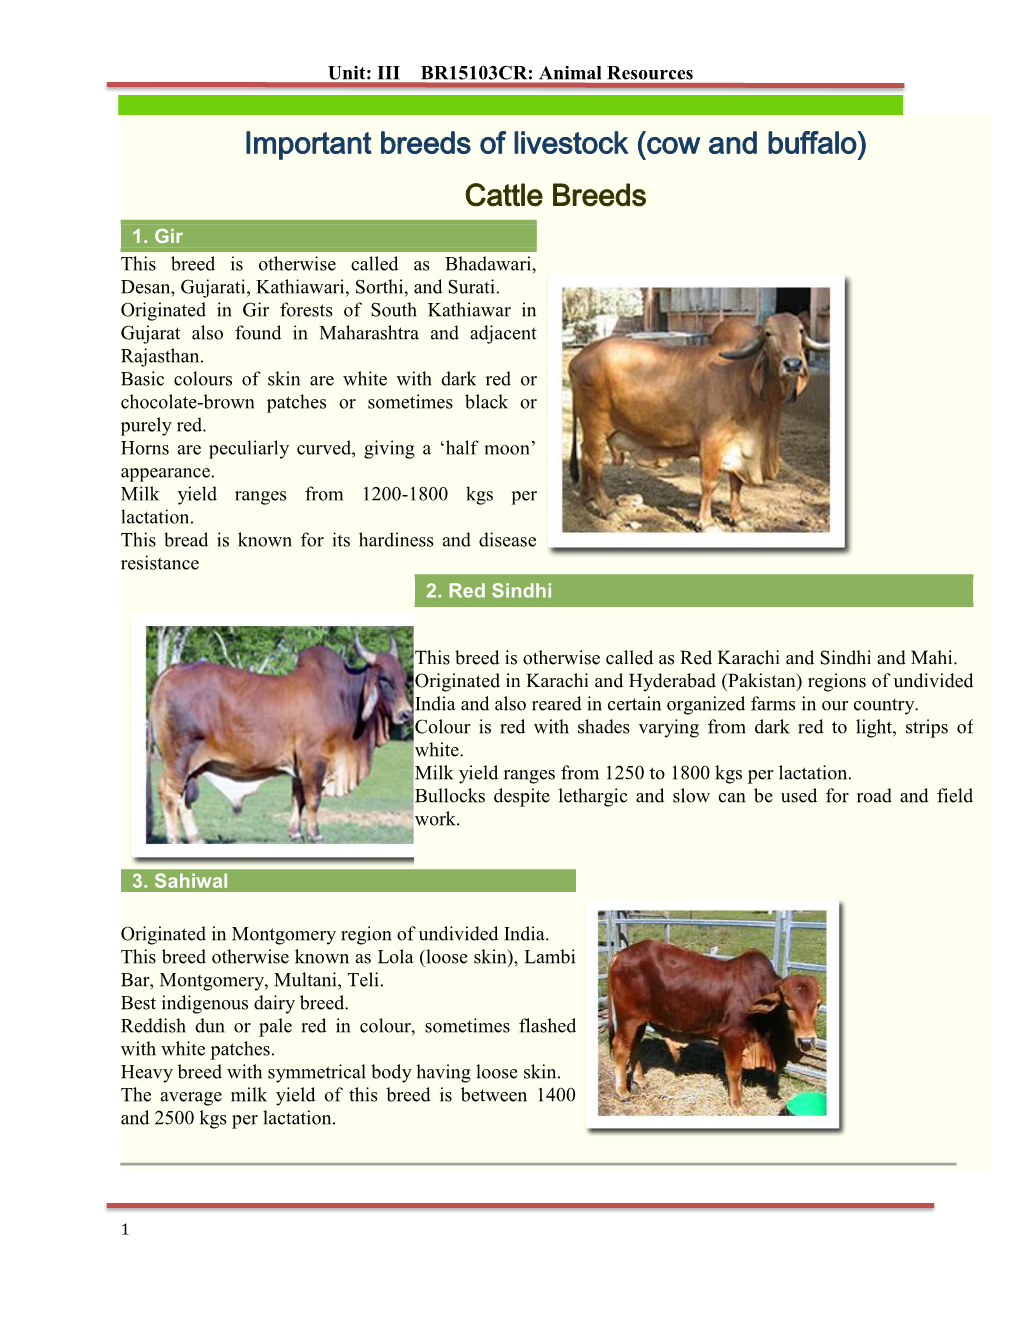 Important Breeds of Livestock (Cow and Buffalo) Cattle Breeds